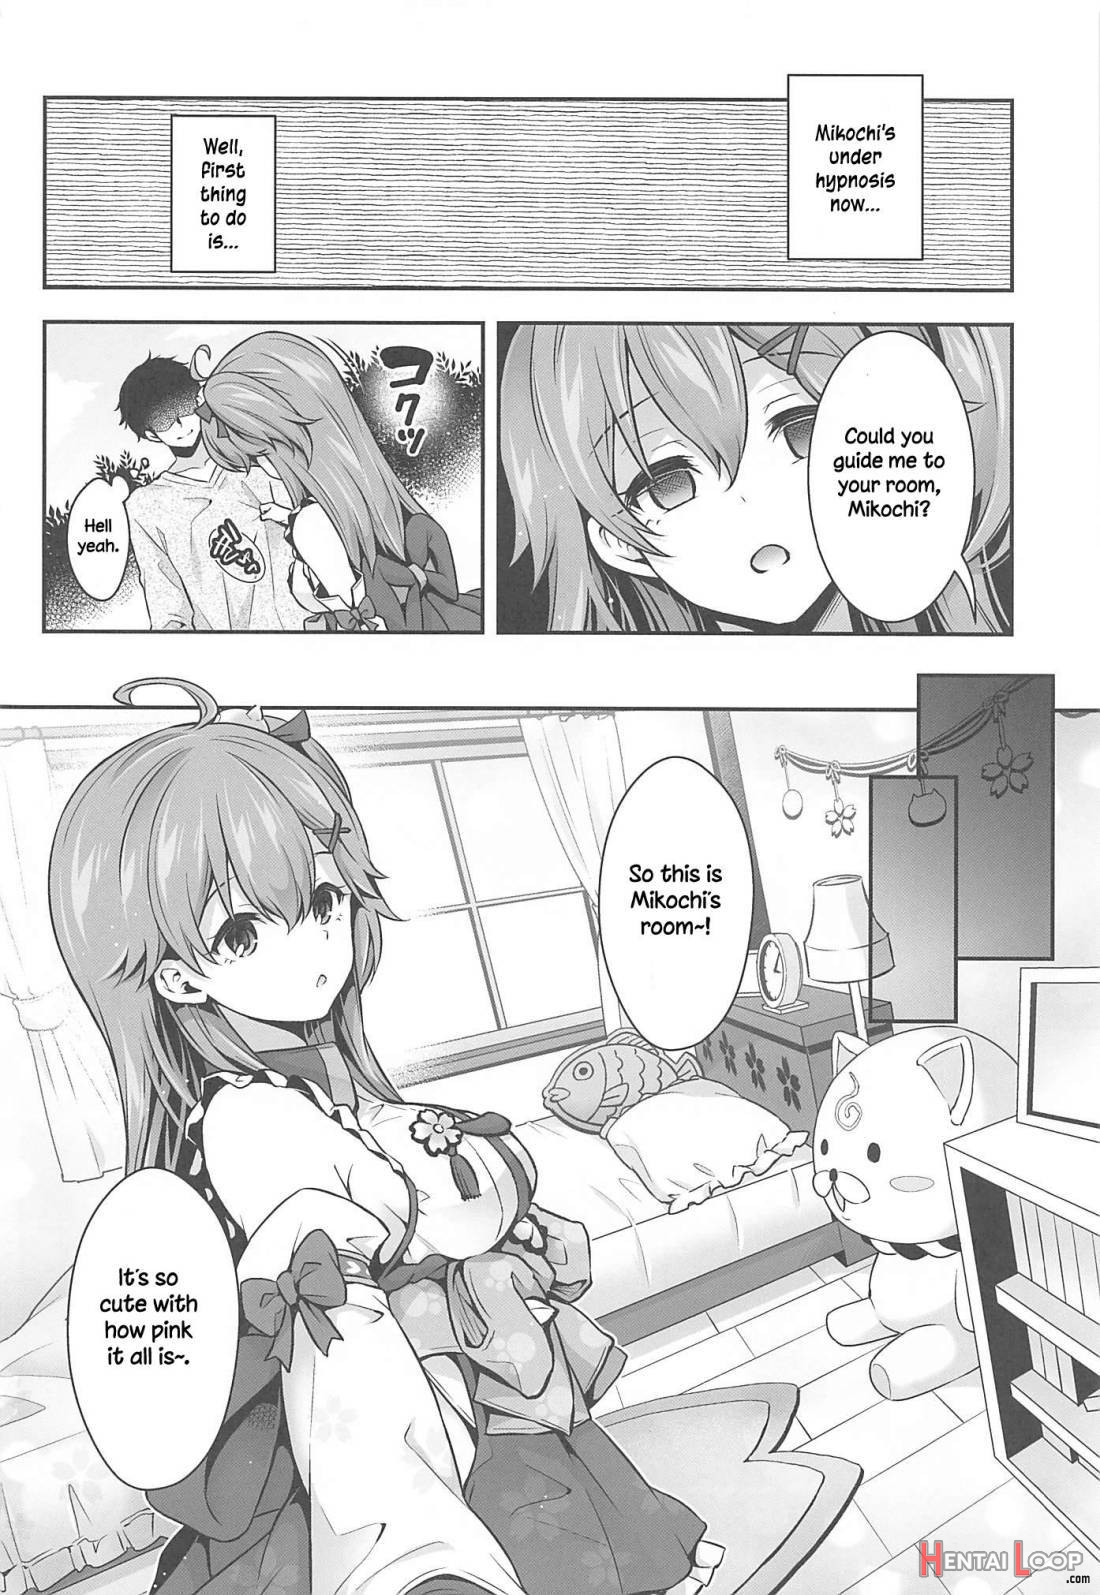 Mikochi Lewd Hypnosis Book ~infant Regression Edition~ page 6